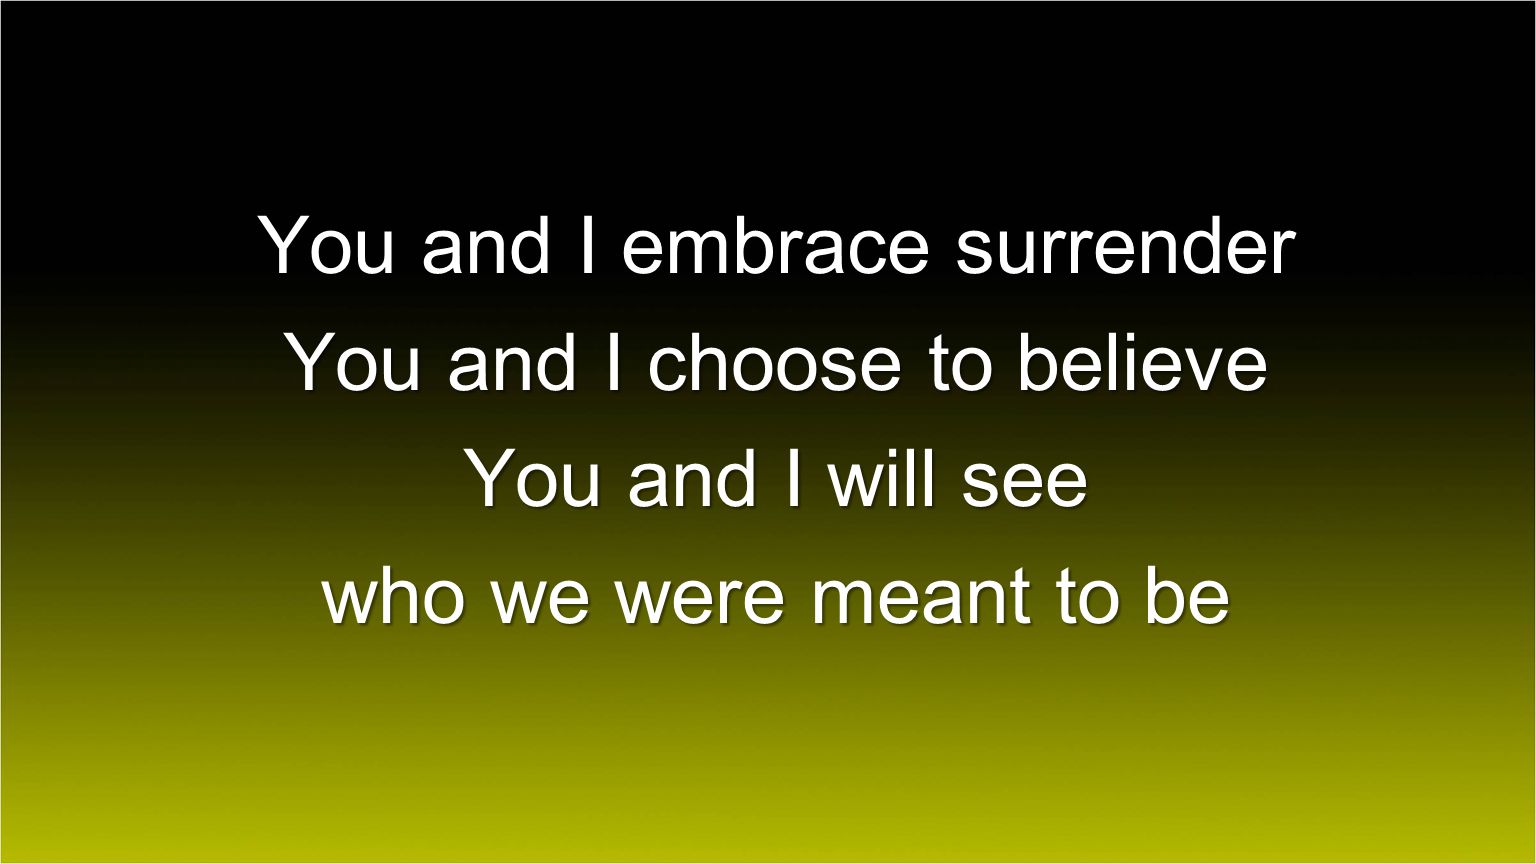 You and I embrace surrender You and I choose to believe